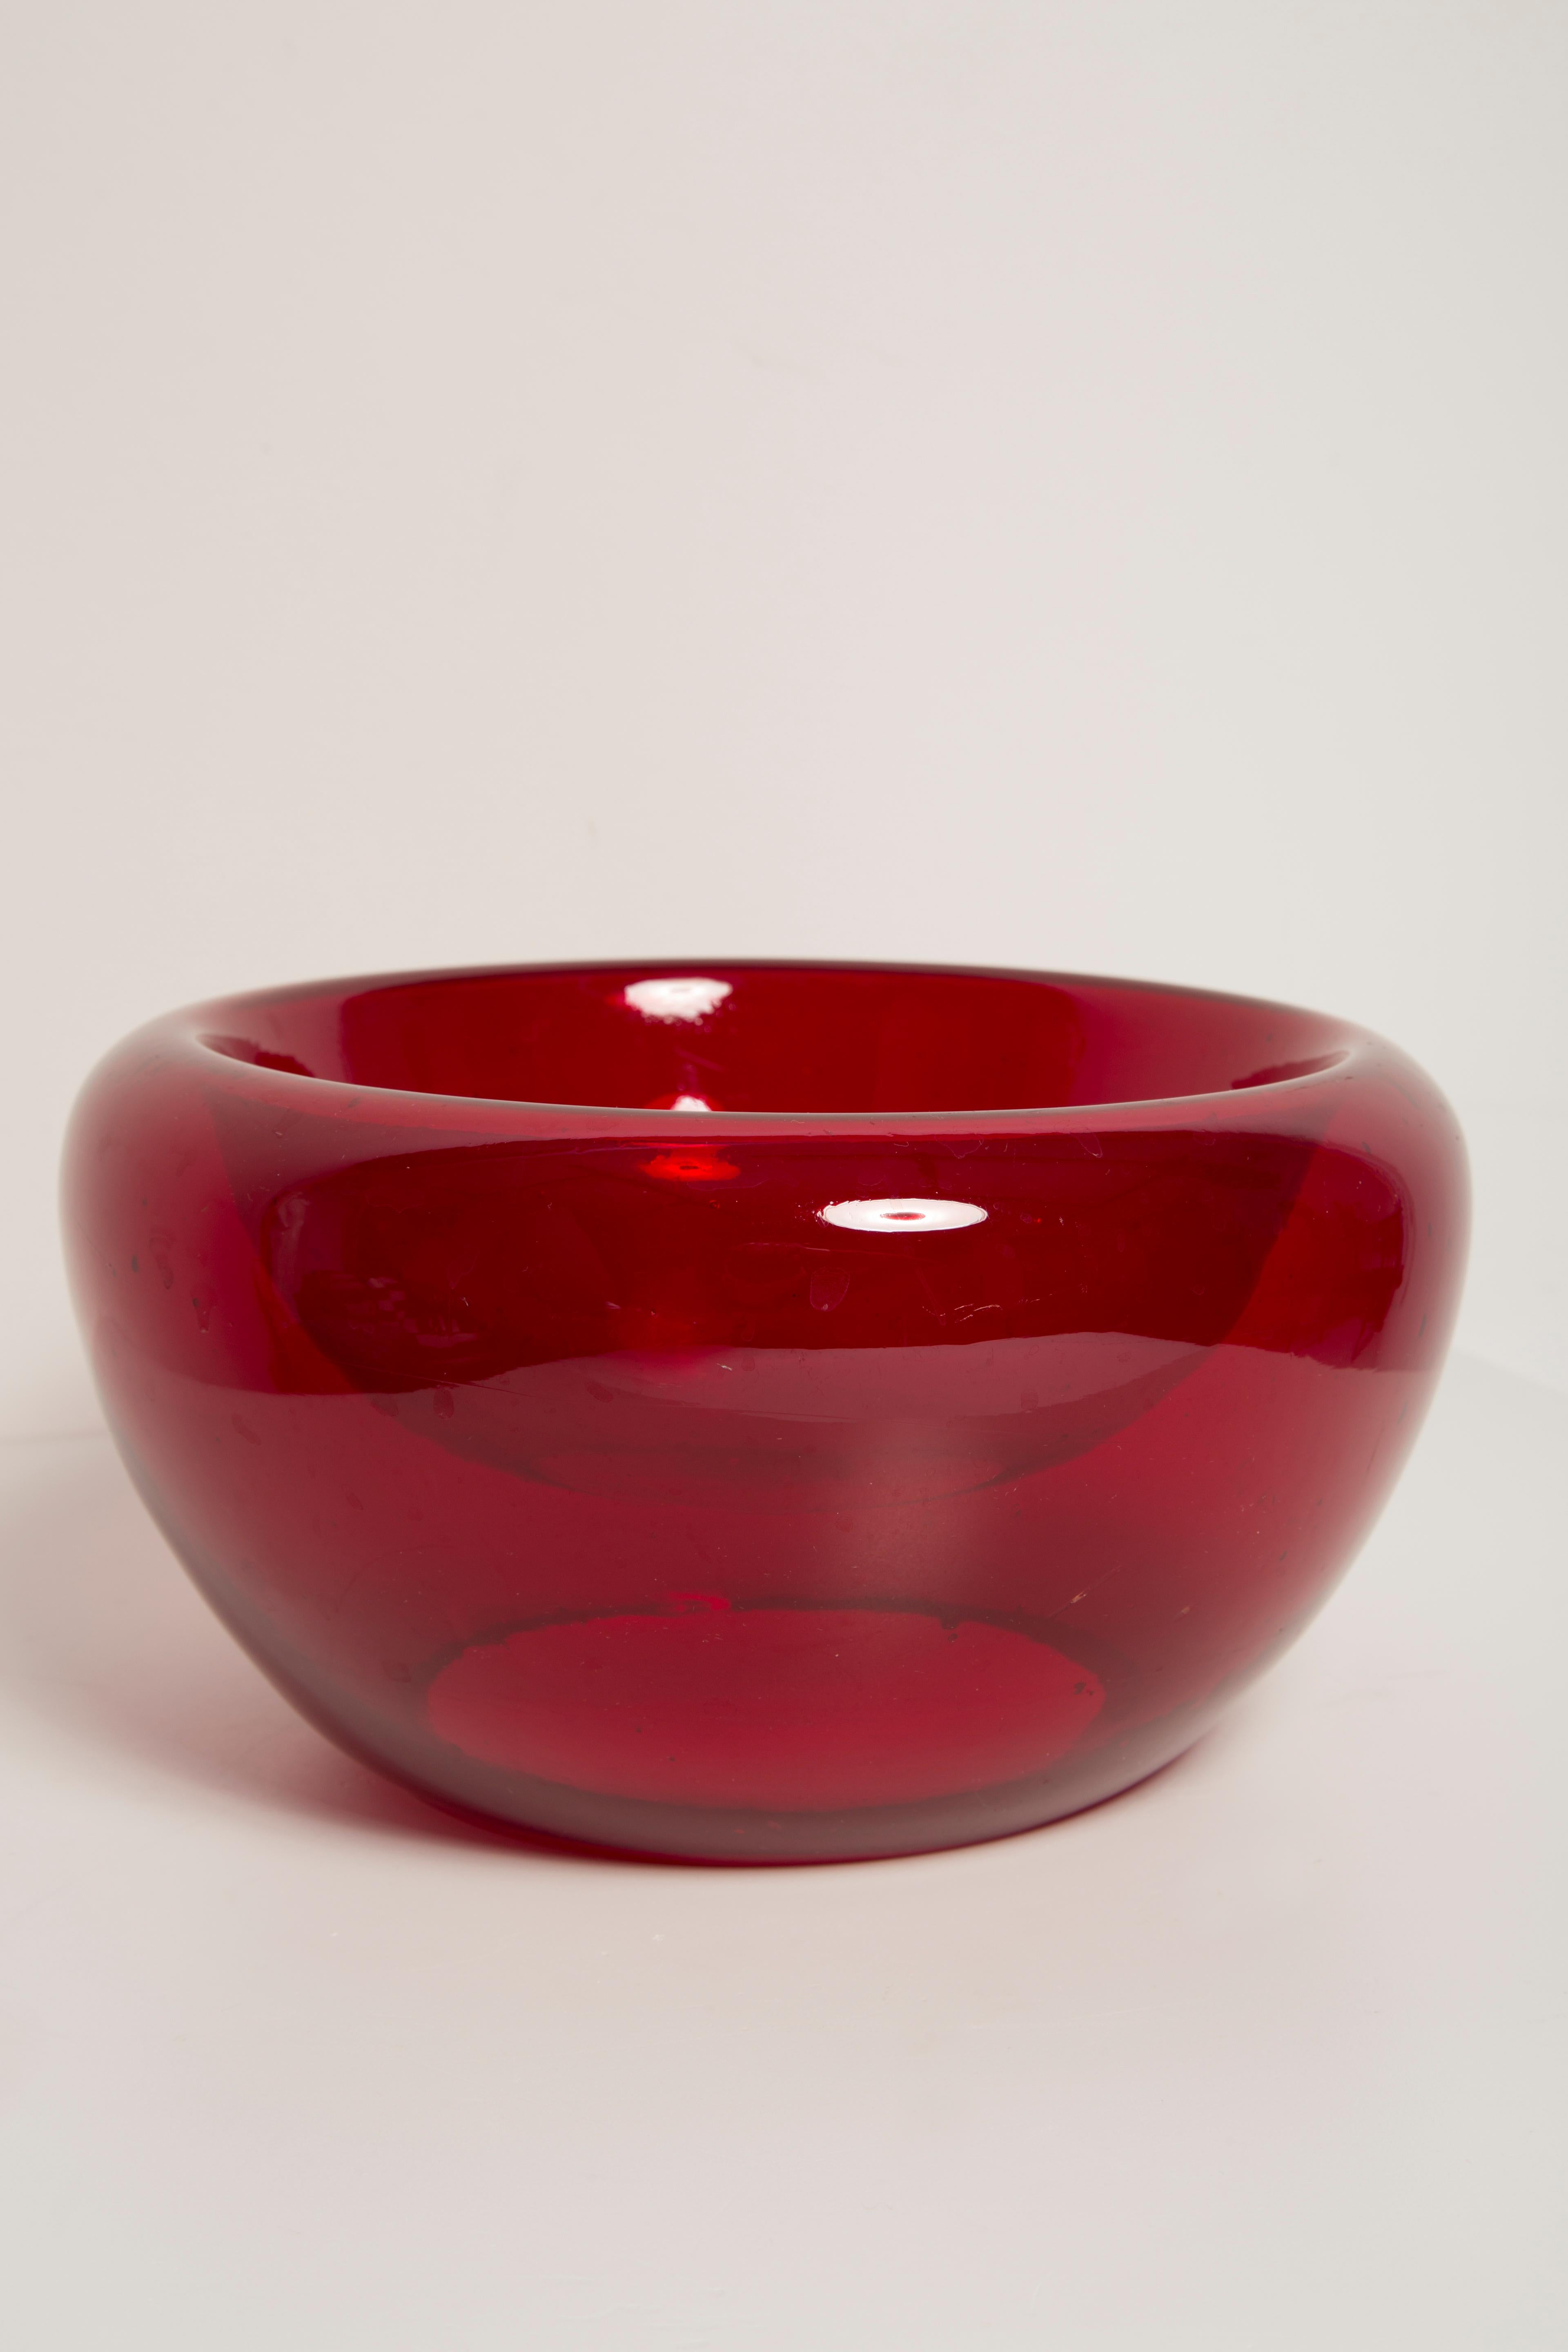 Ceramic Mid Century Red Decorative Murano Round Glass Bowl Plate, Italy, 1960s For Sale